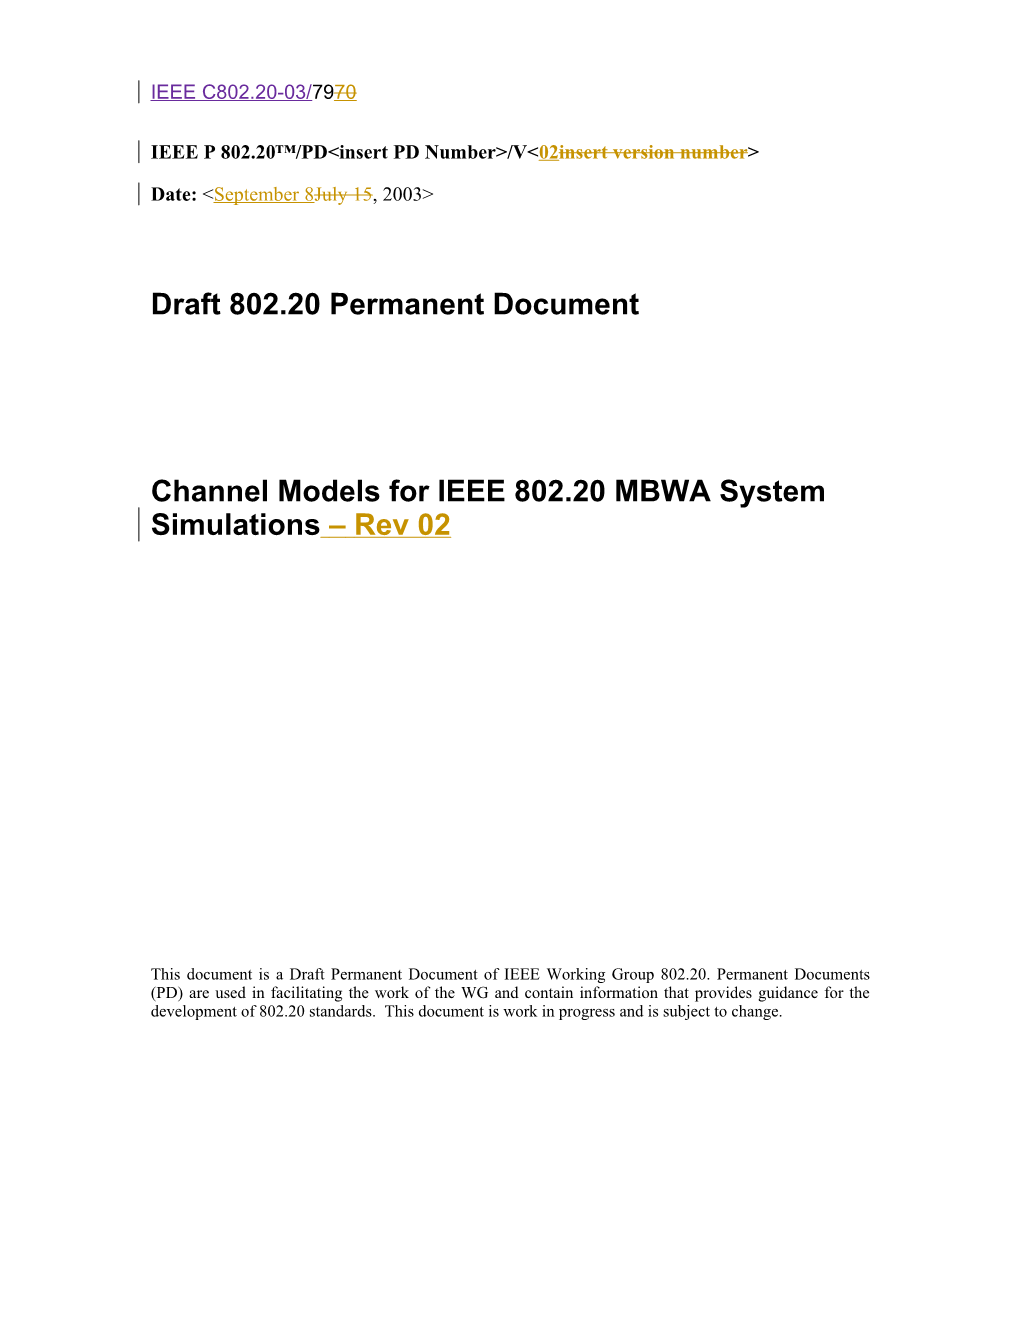 IEEE802.20 Ch Modeling Contri V02